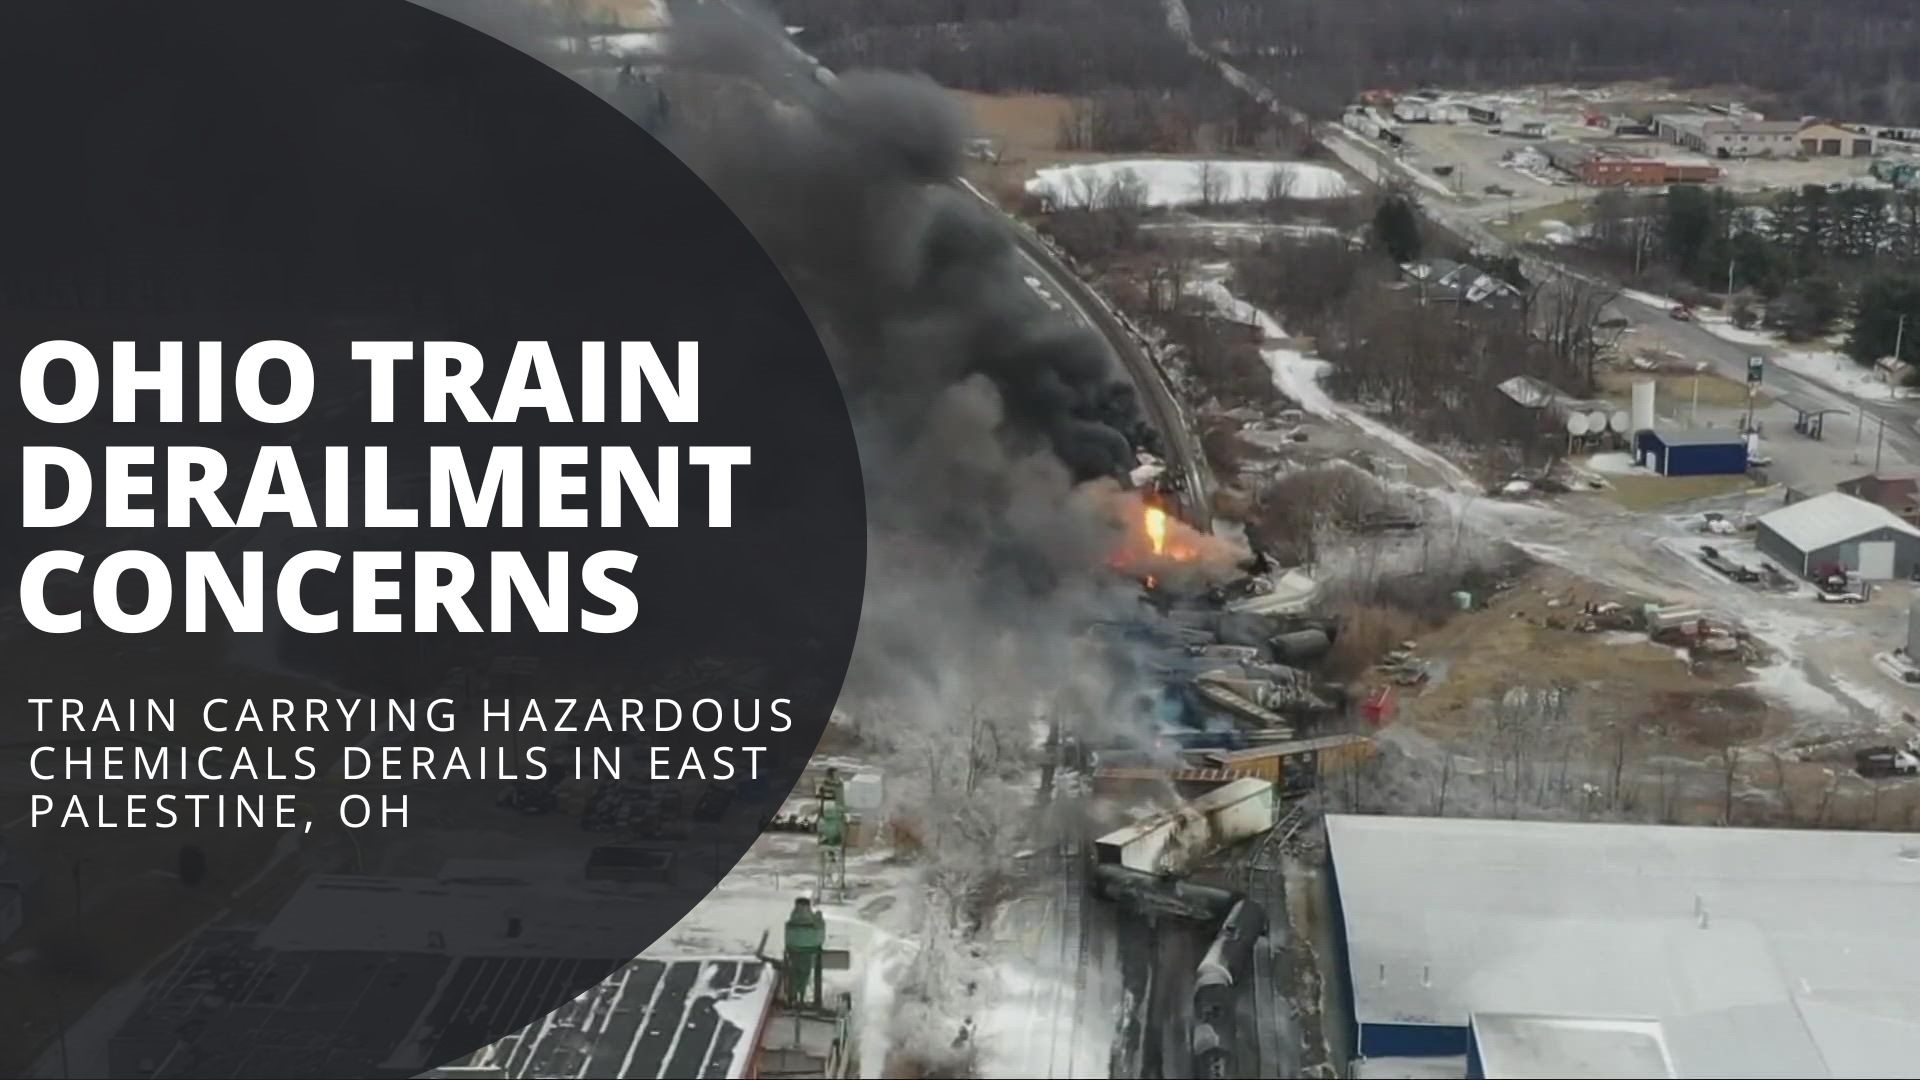 A look into the train derailment in East Palestine, Ohio that is causing health and environmental concerns.